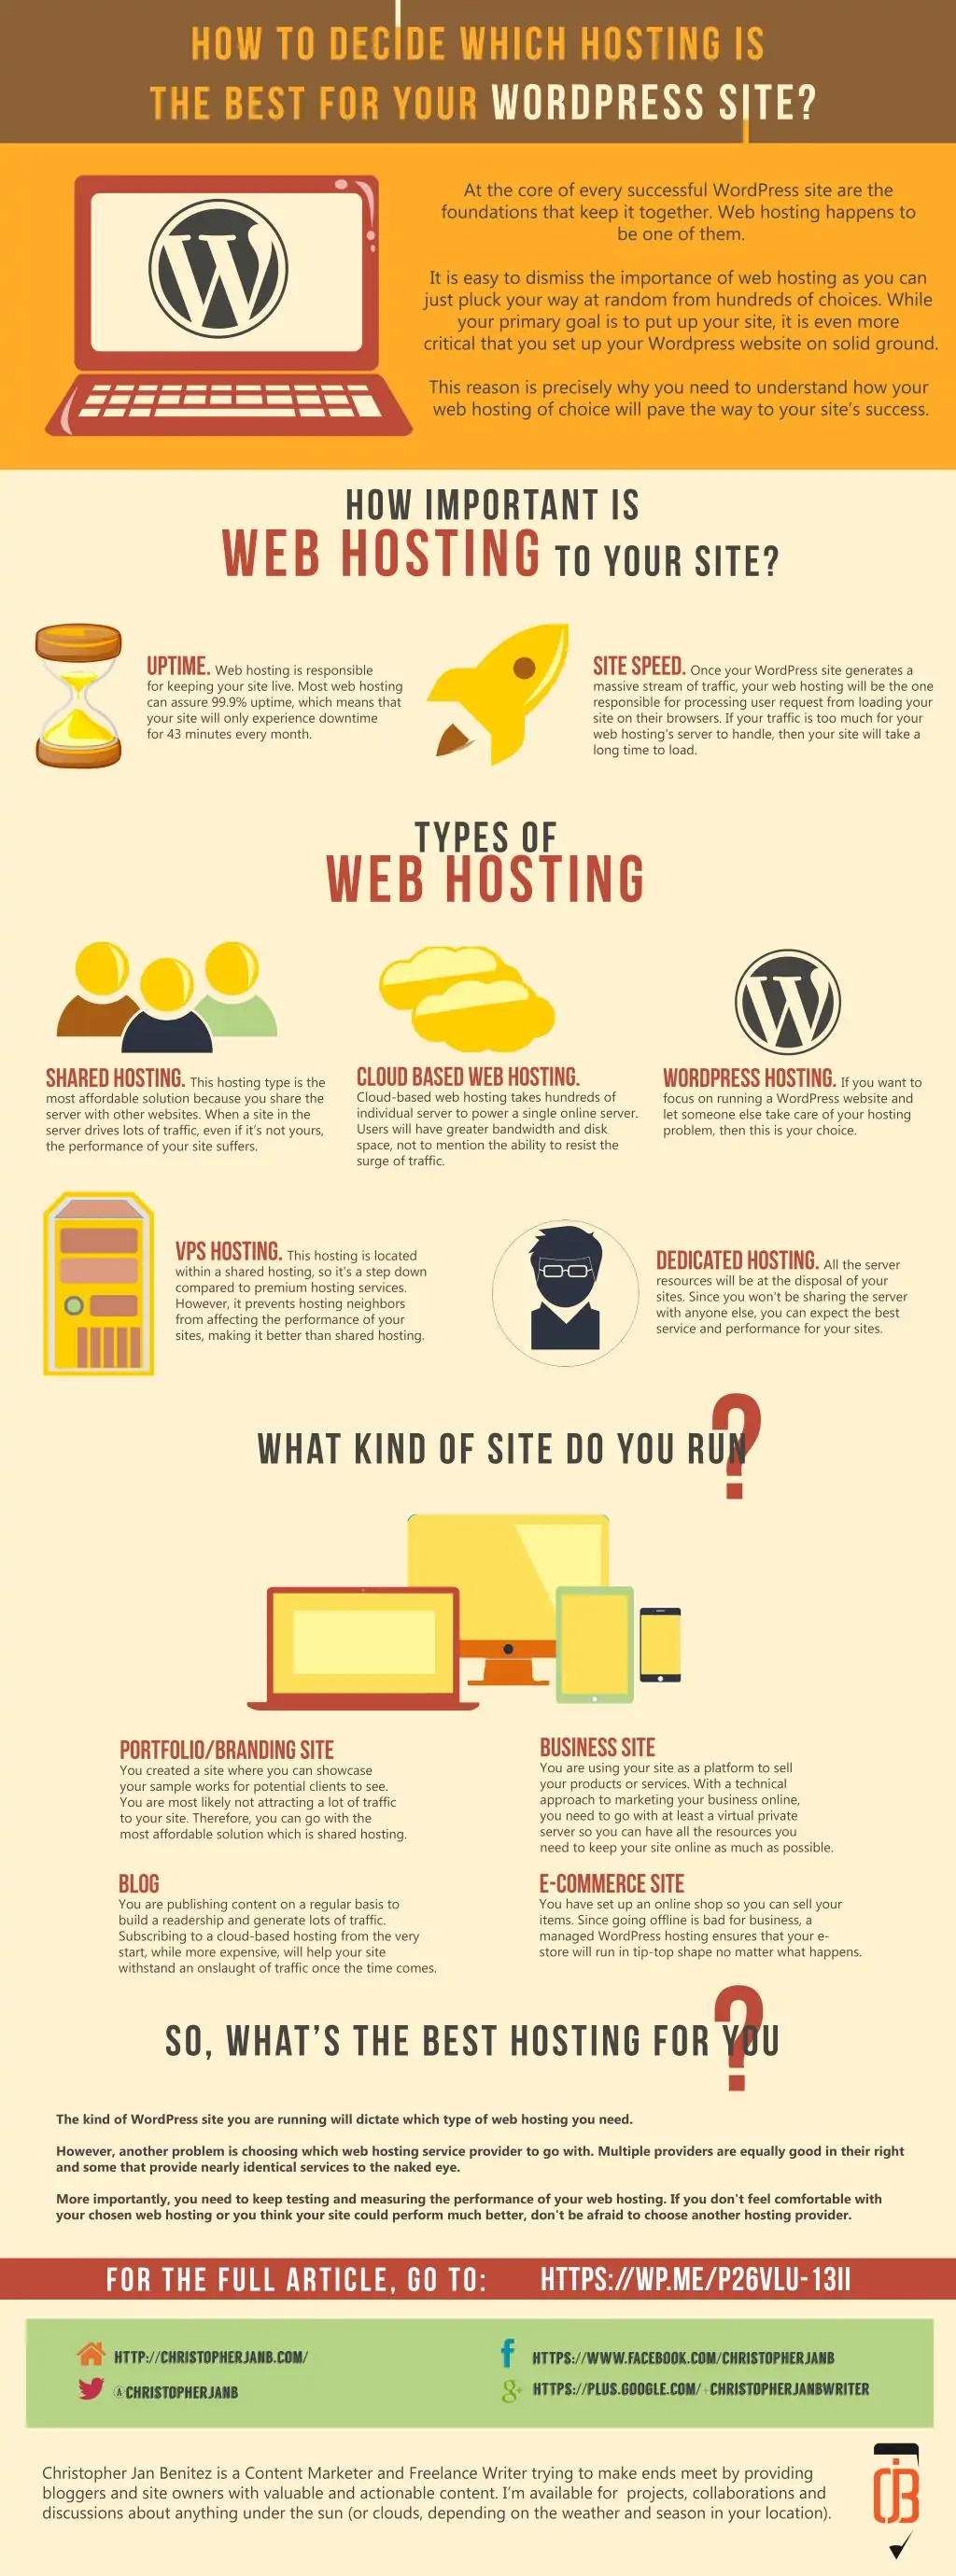 How to Decide Which Hosting is the Best for Your WordPress Site